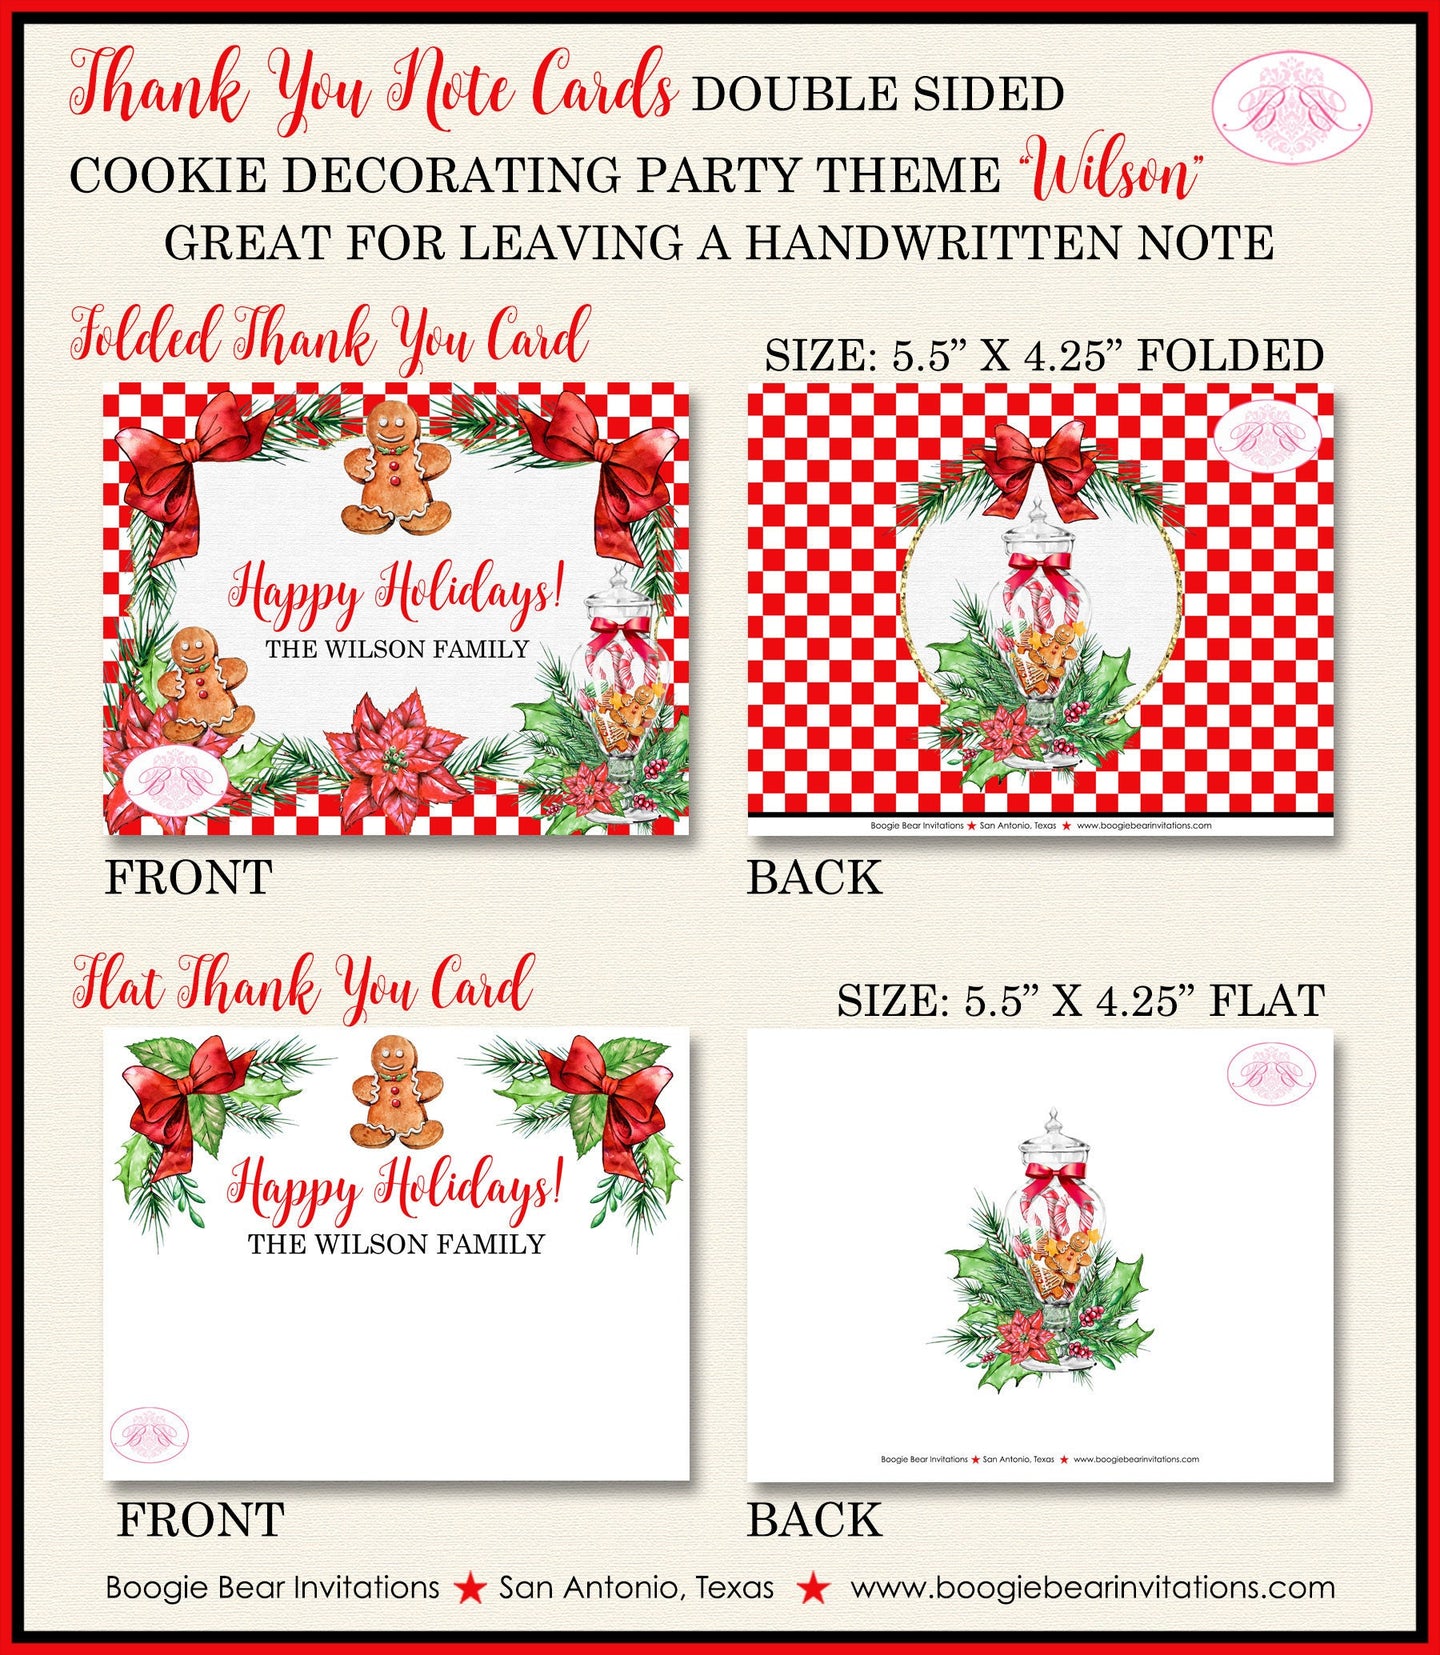 Cookie Decorating Party Thank You Card Note Christmas Red Gingerbread Poinsettia Candycane Kids Boogie Bear Invitations Wilson Theme Printed